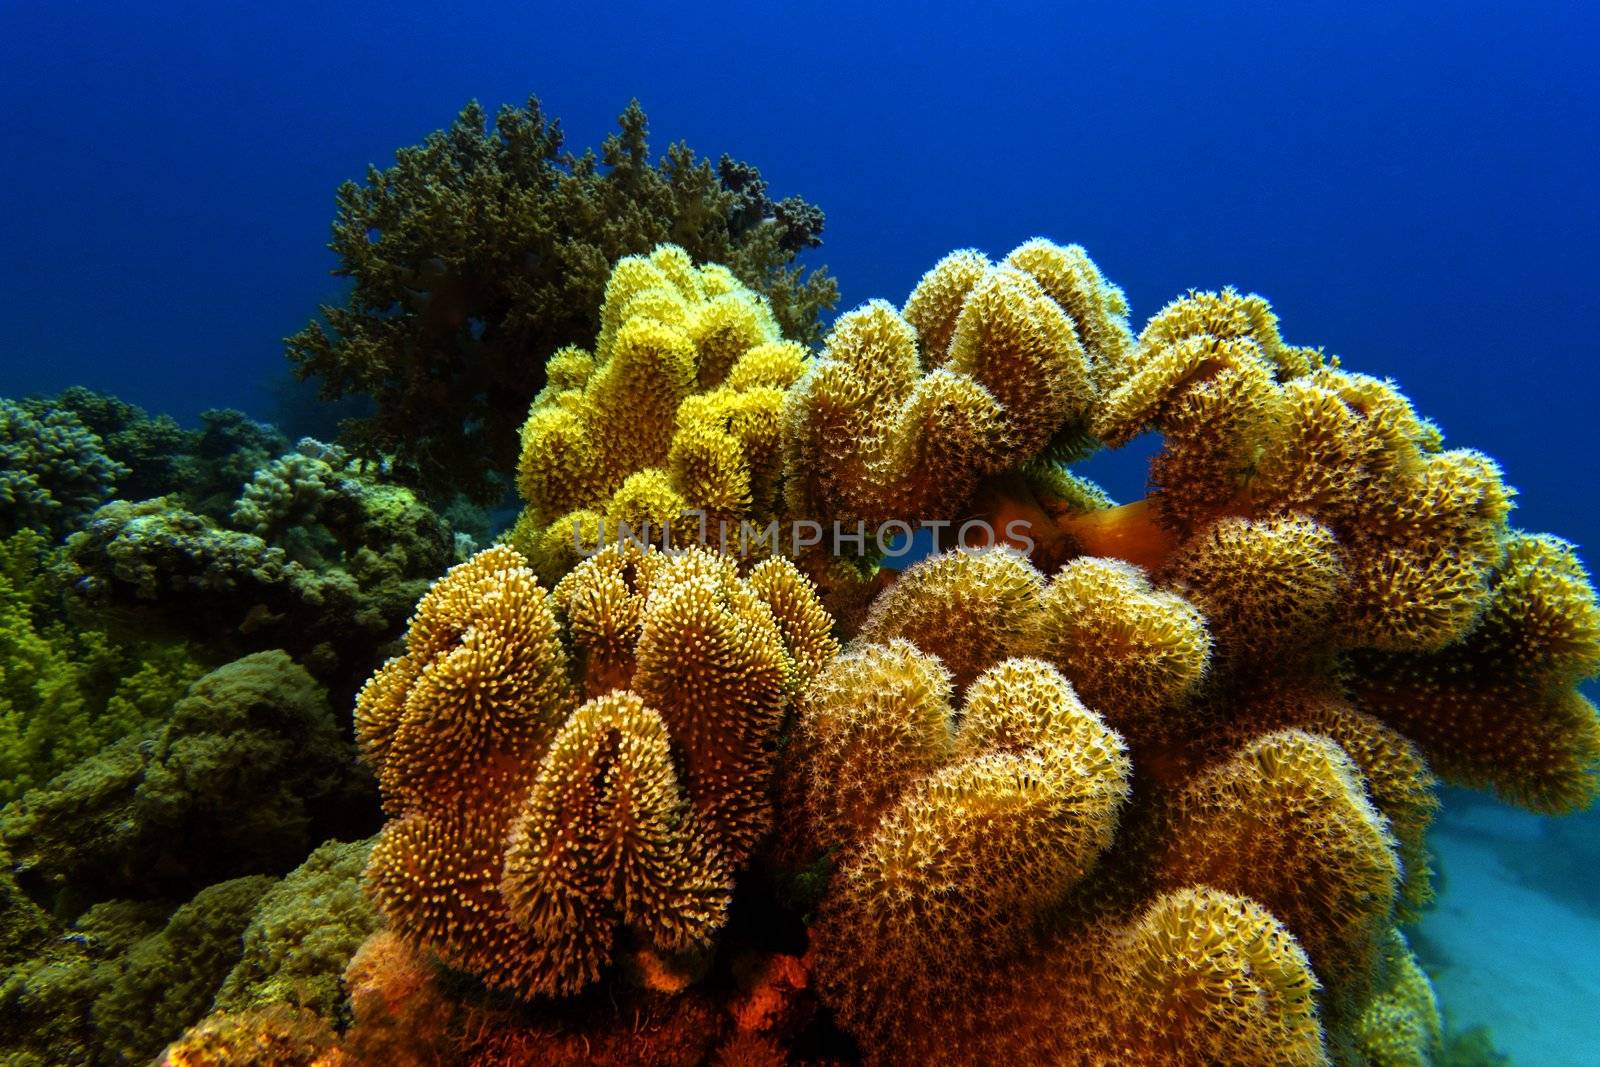 coral reef with great yellow soft coral at the bottom of tropical sea by mychadre77